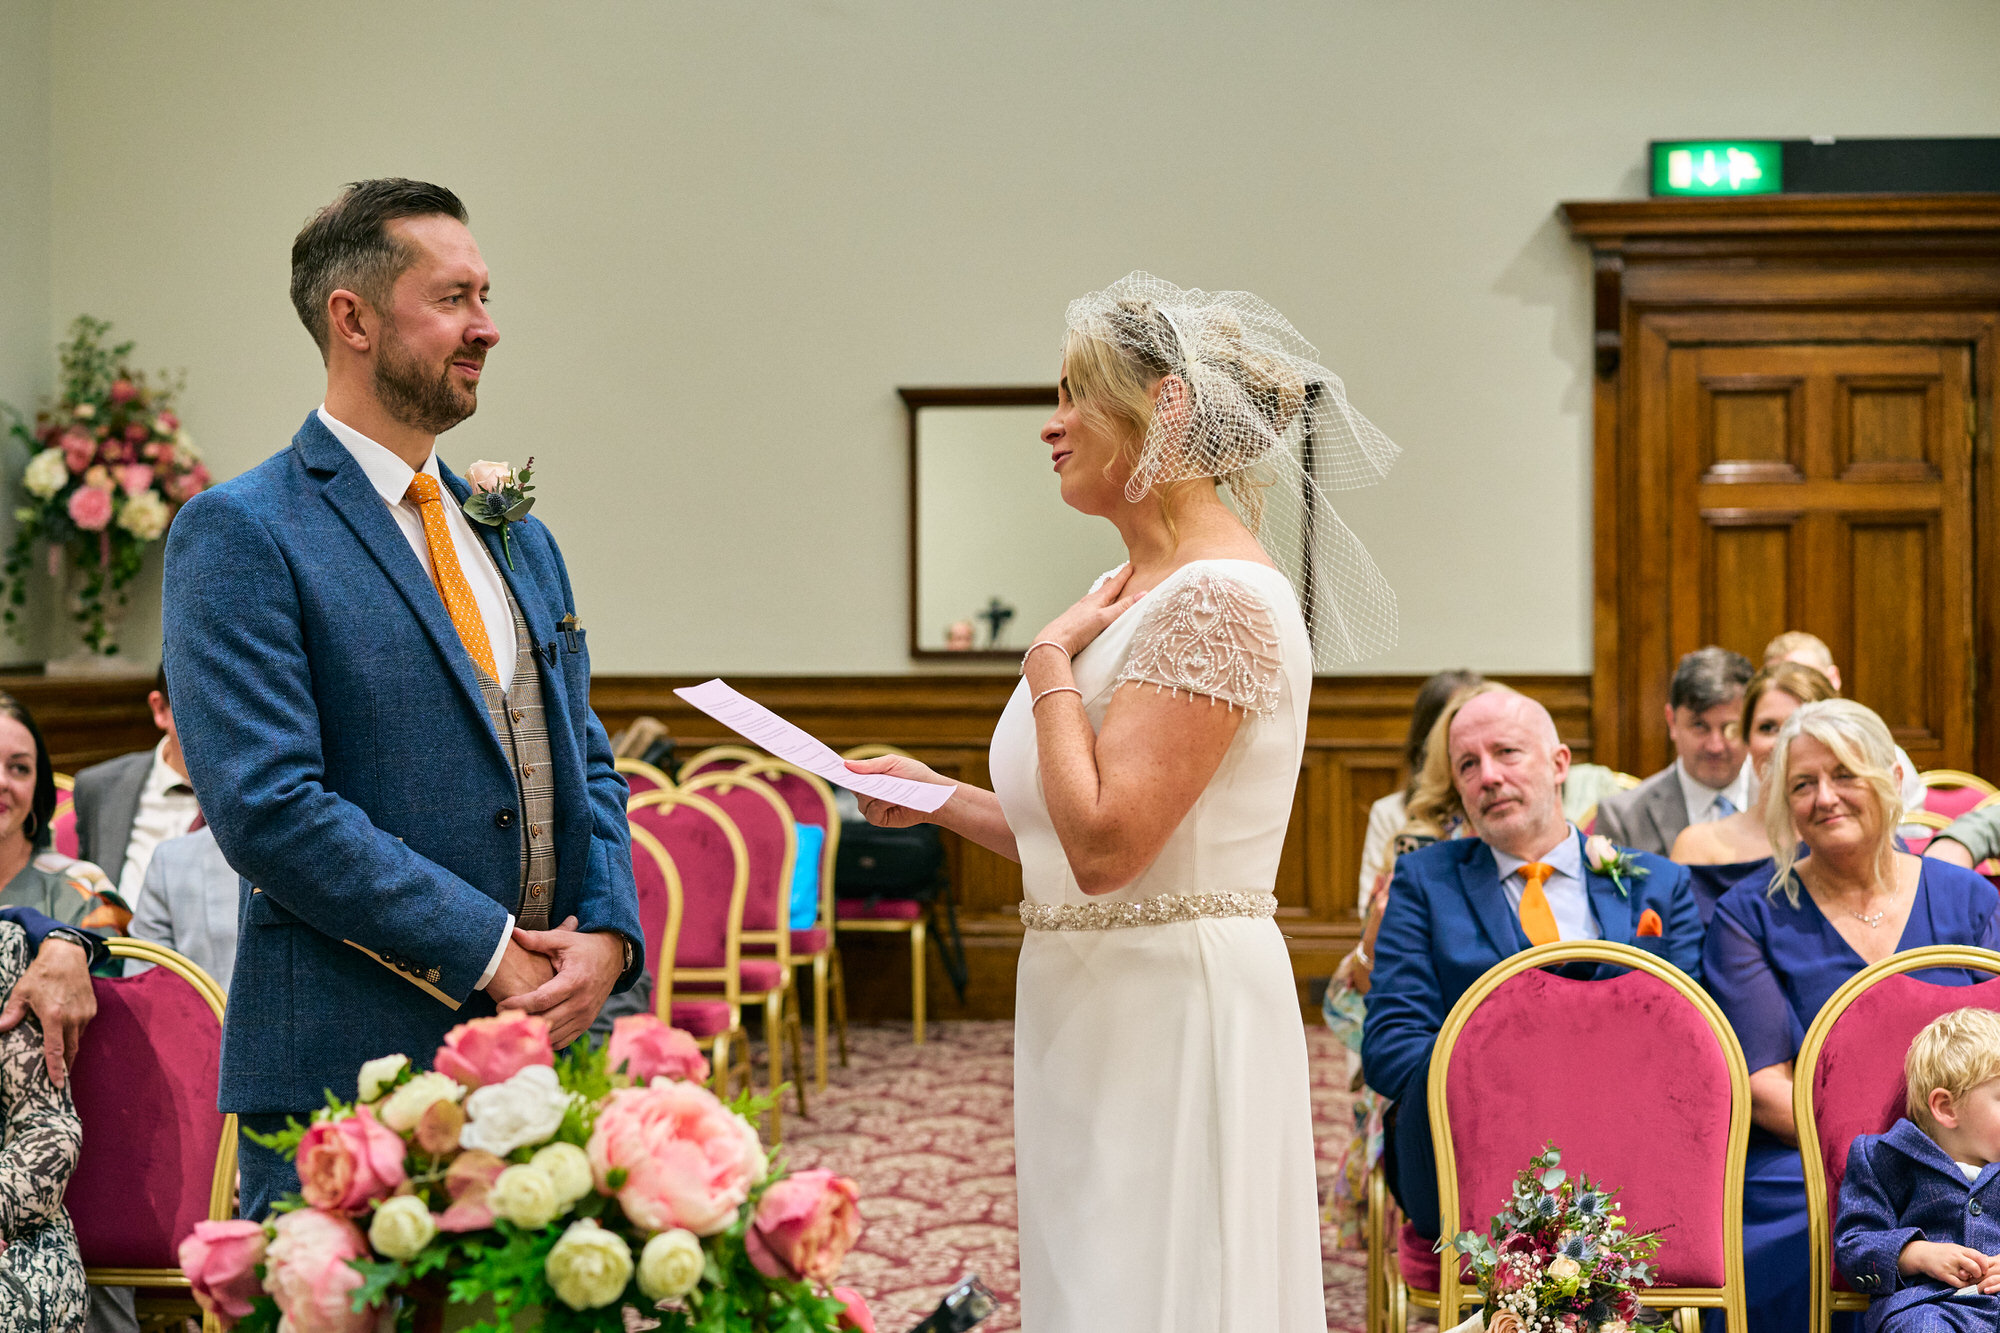 the bride reads her personal vows during a wedding ceremony in liverpool